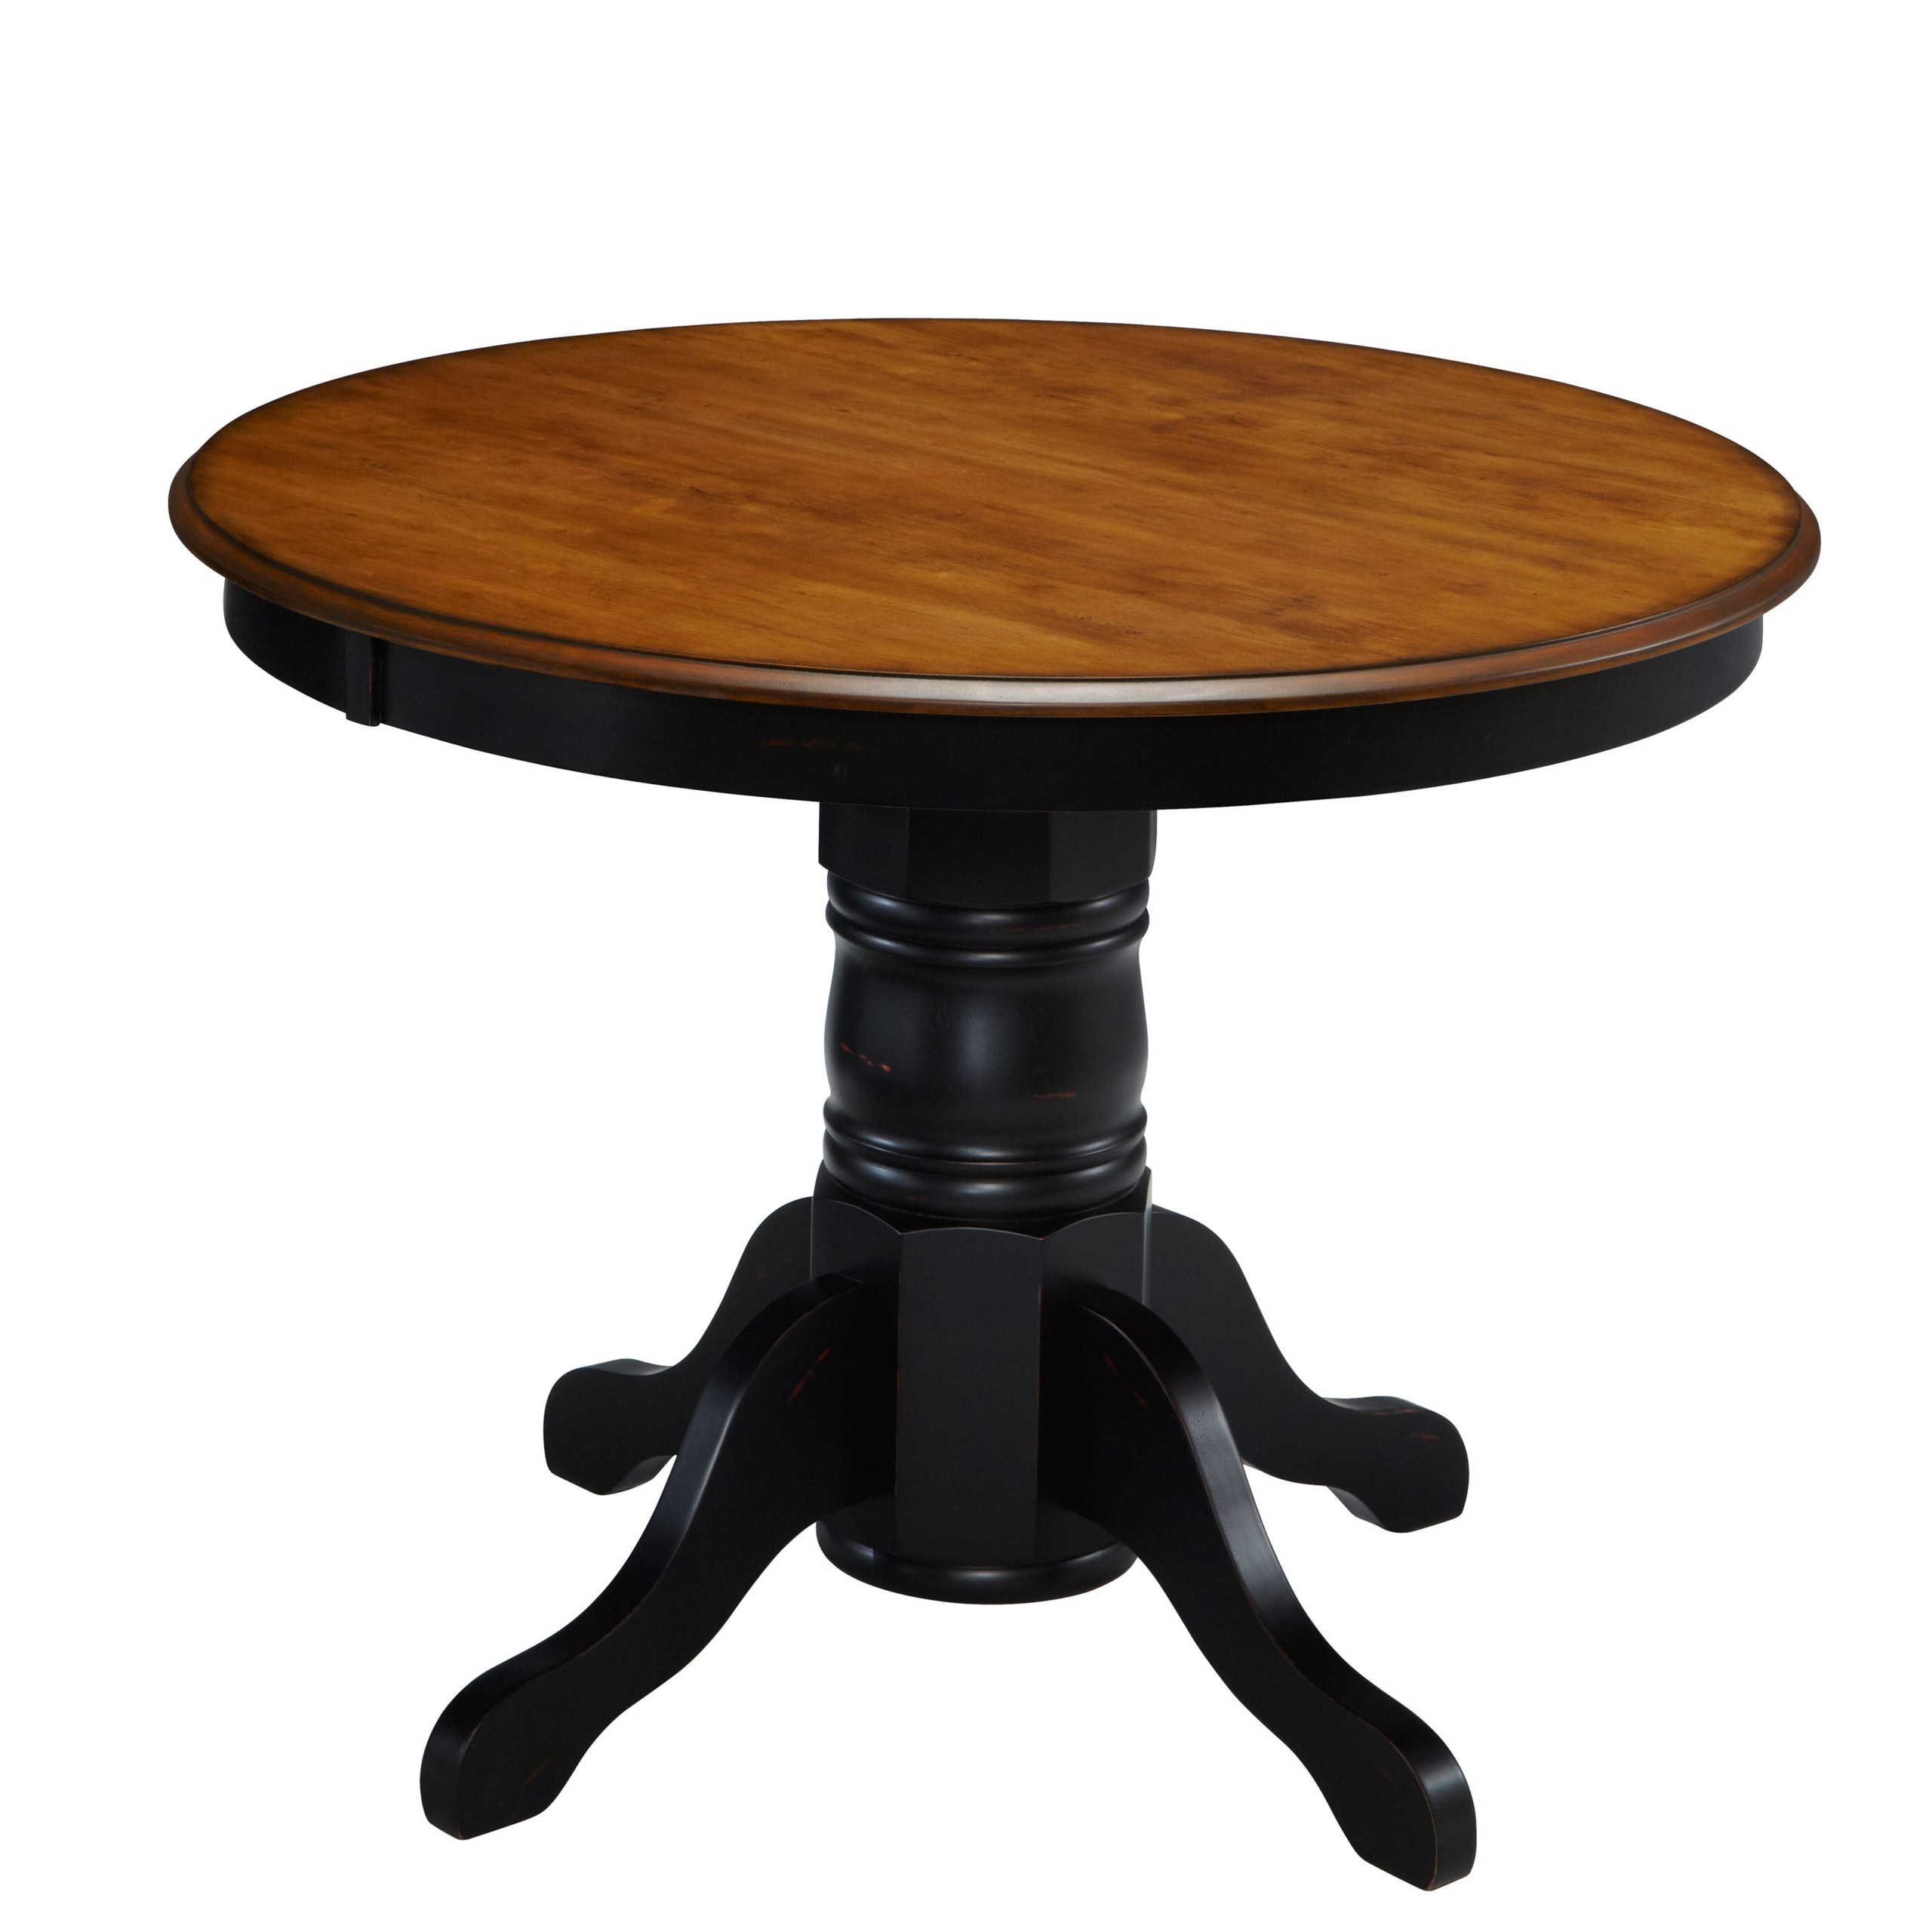 Home Styles 5519-30 The French Countryside Pedestal Table, Oak and Rubbed Black